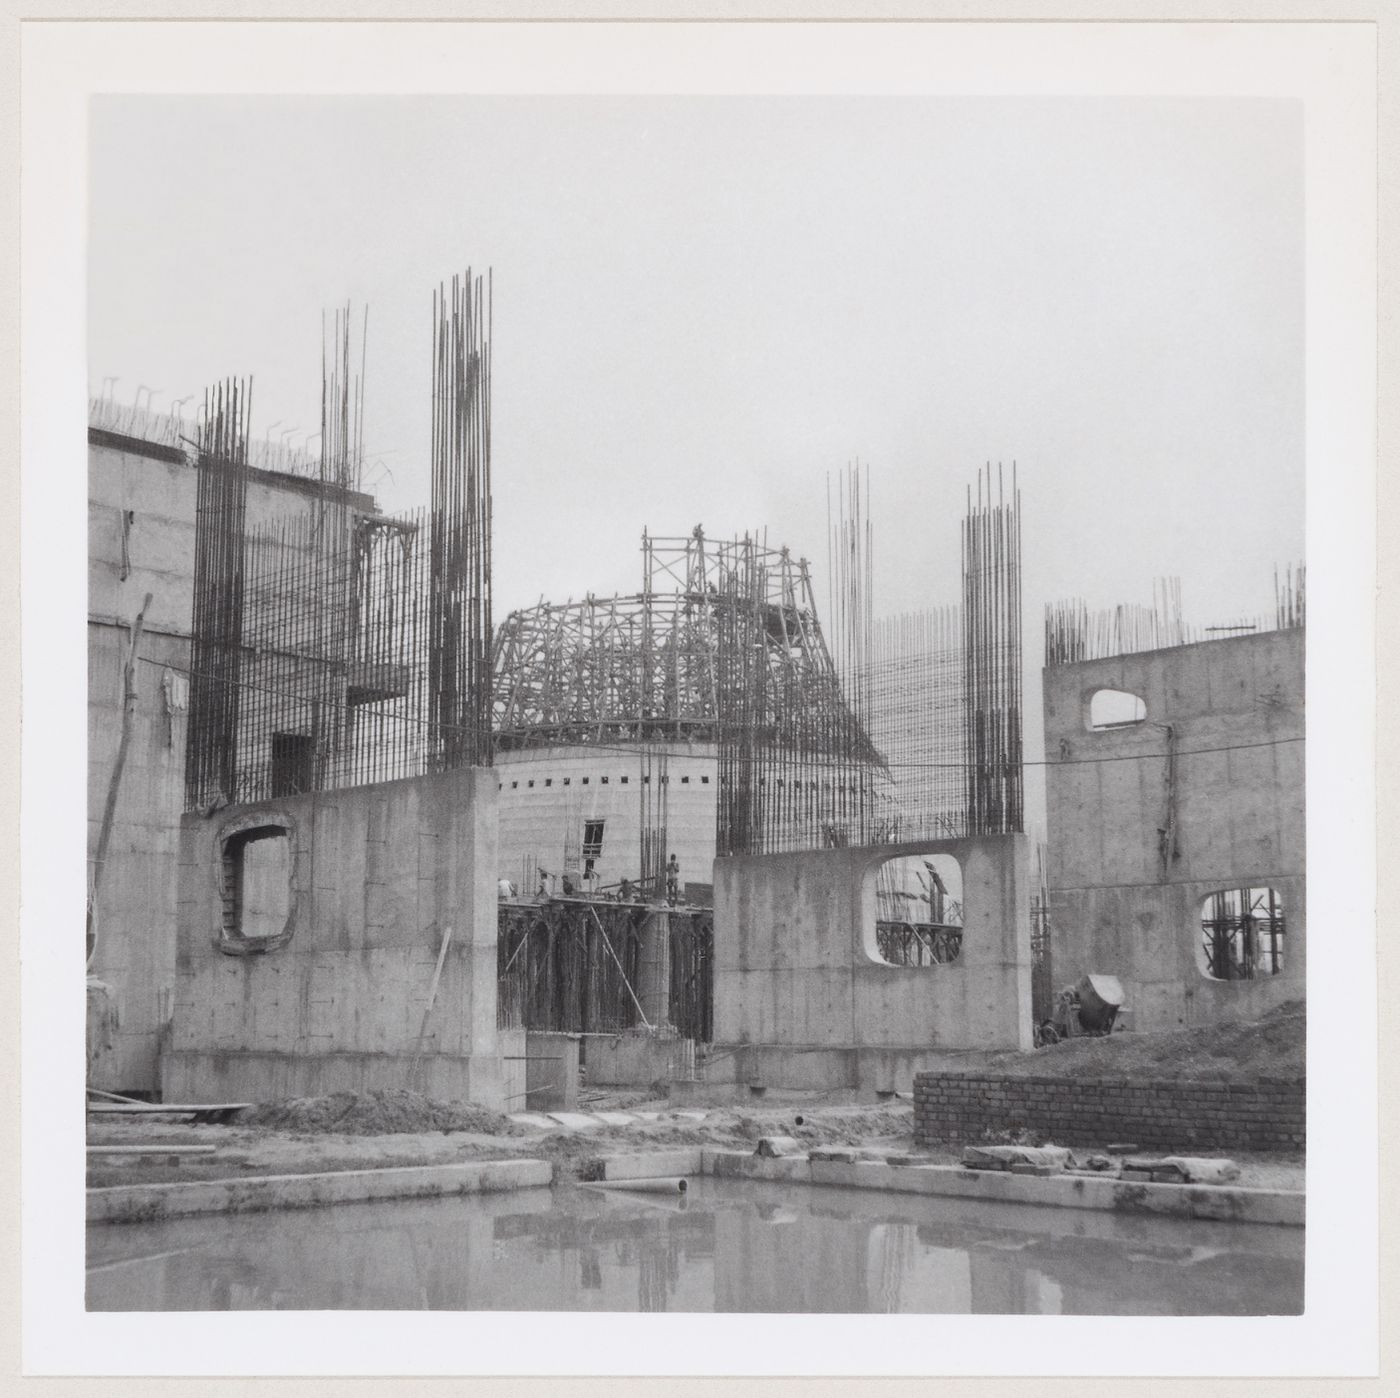 View of the Palace of the Assembly under construction, Chandigarh, India